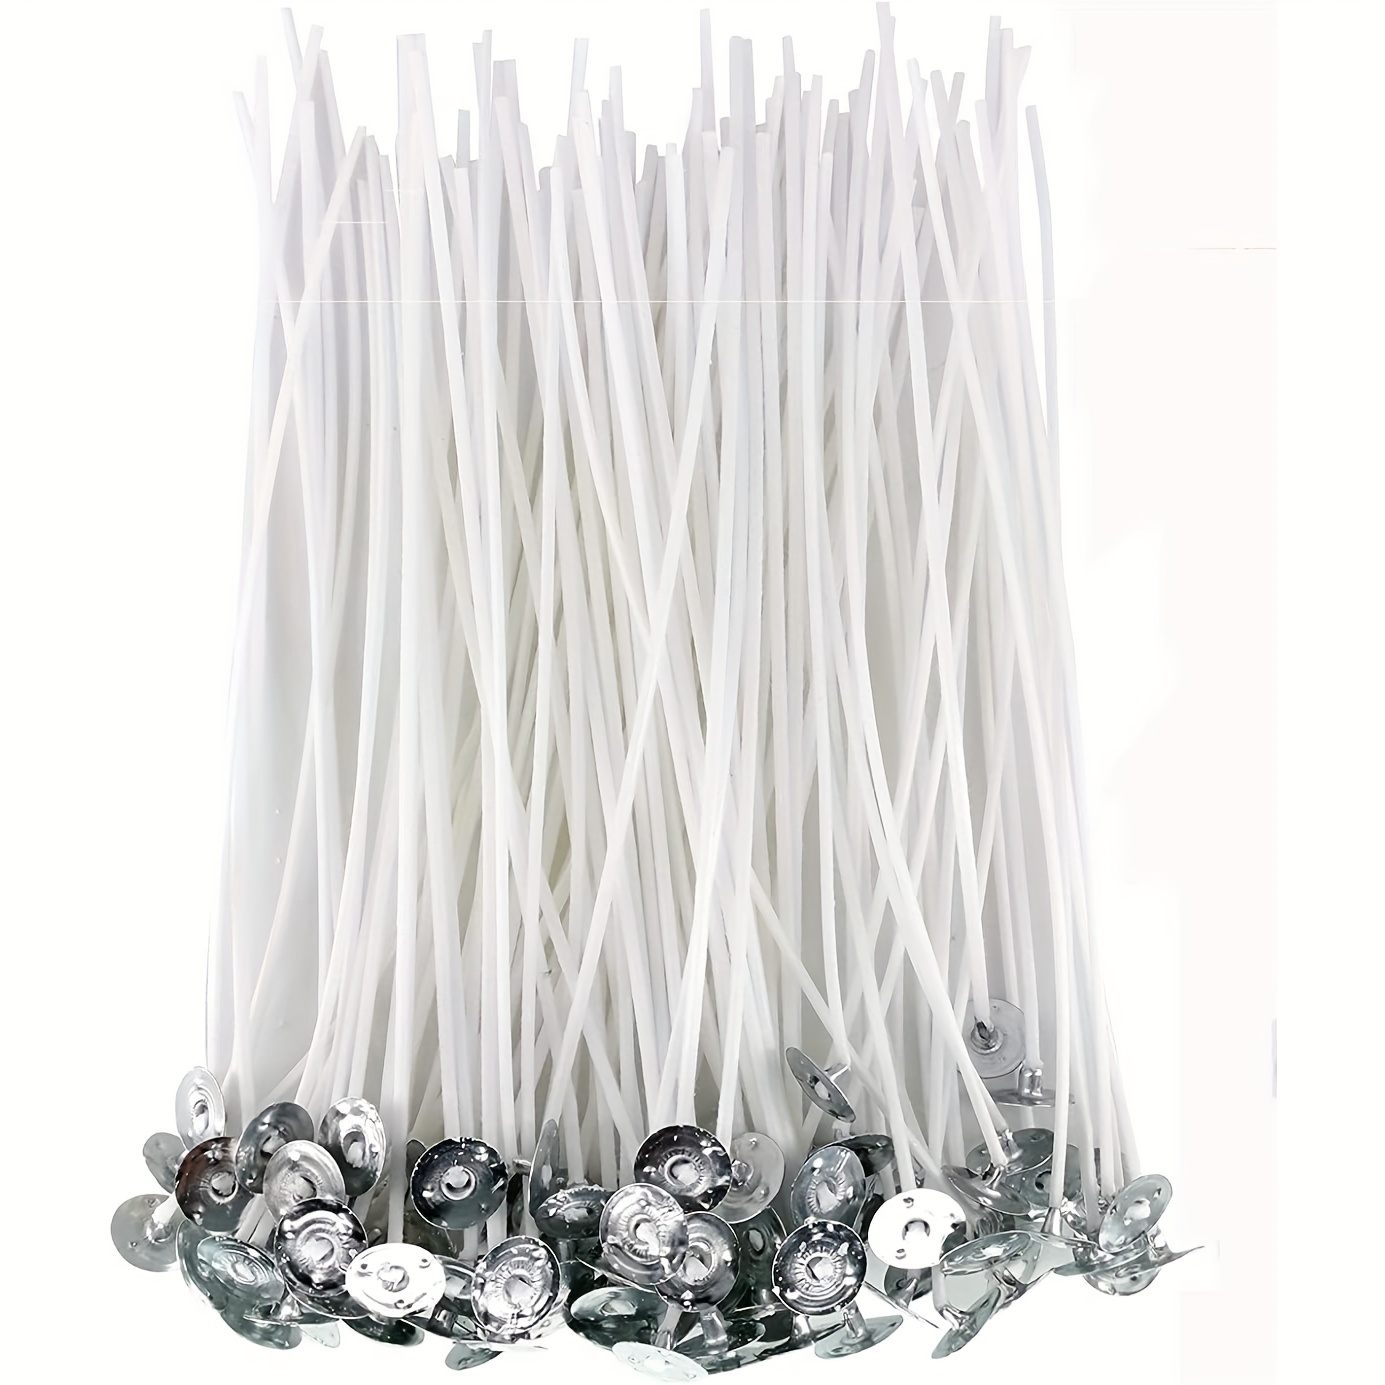 100PCS Durable Waxed Candles Making Metal Wick Sustainers Carry